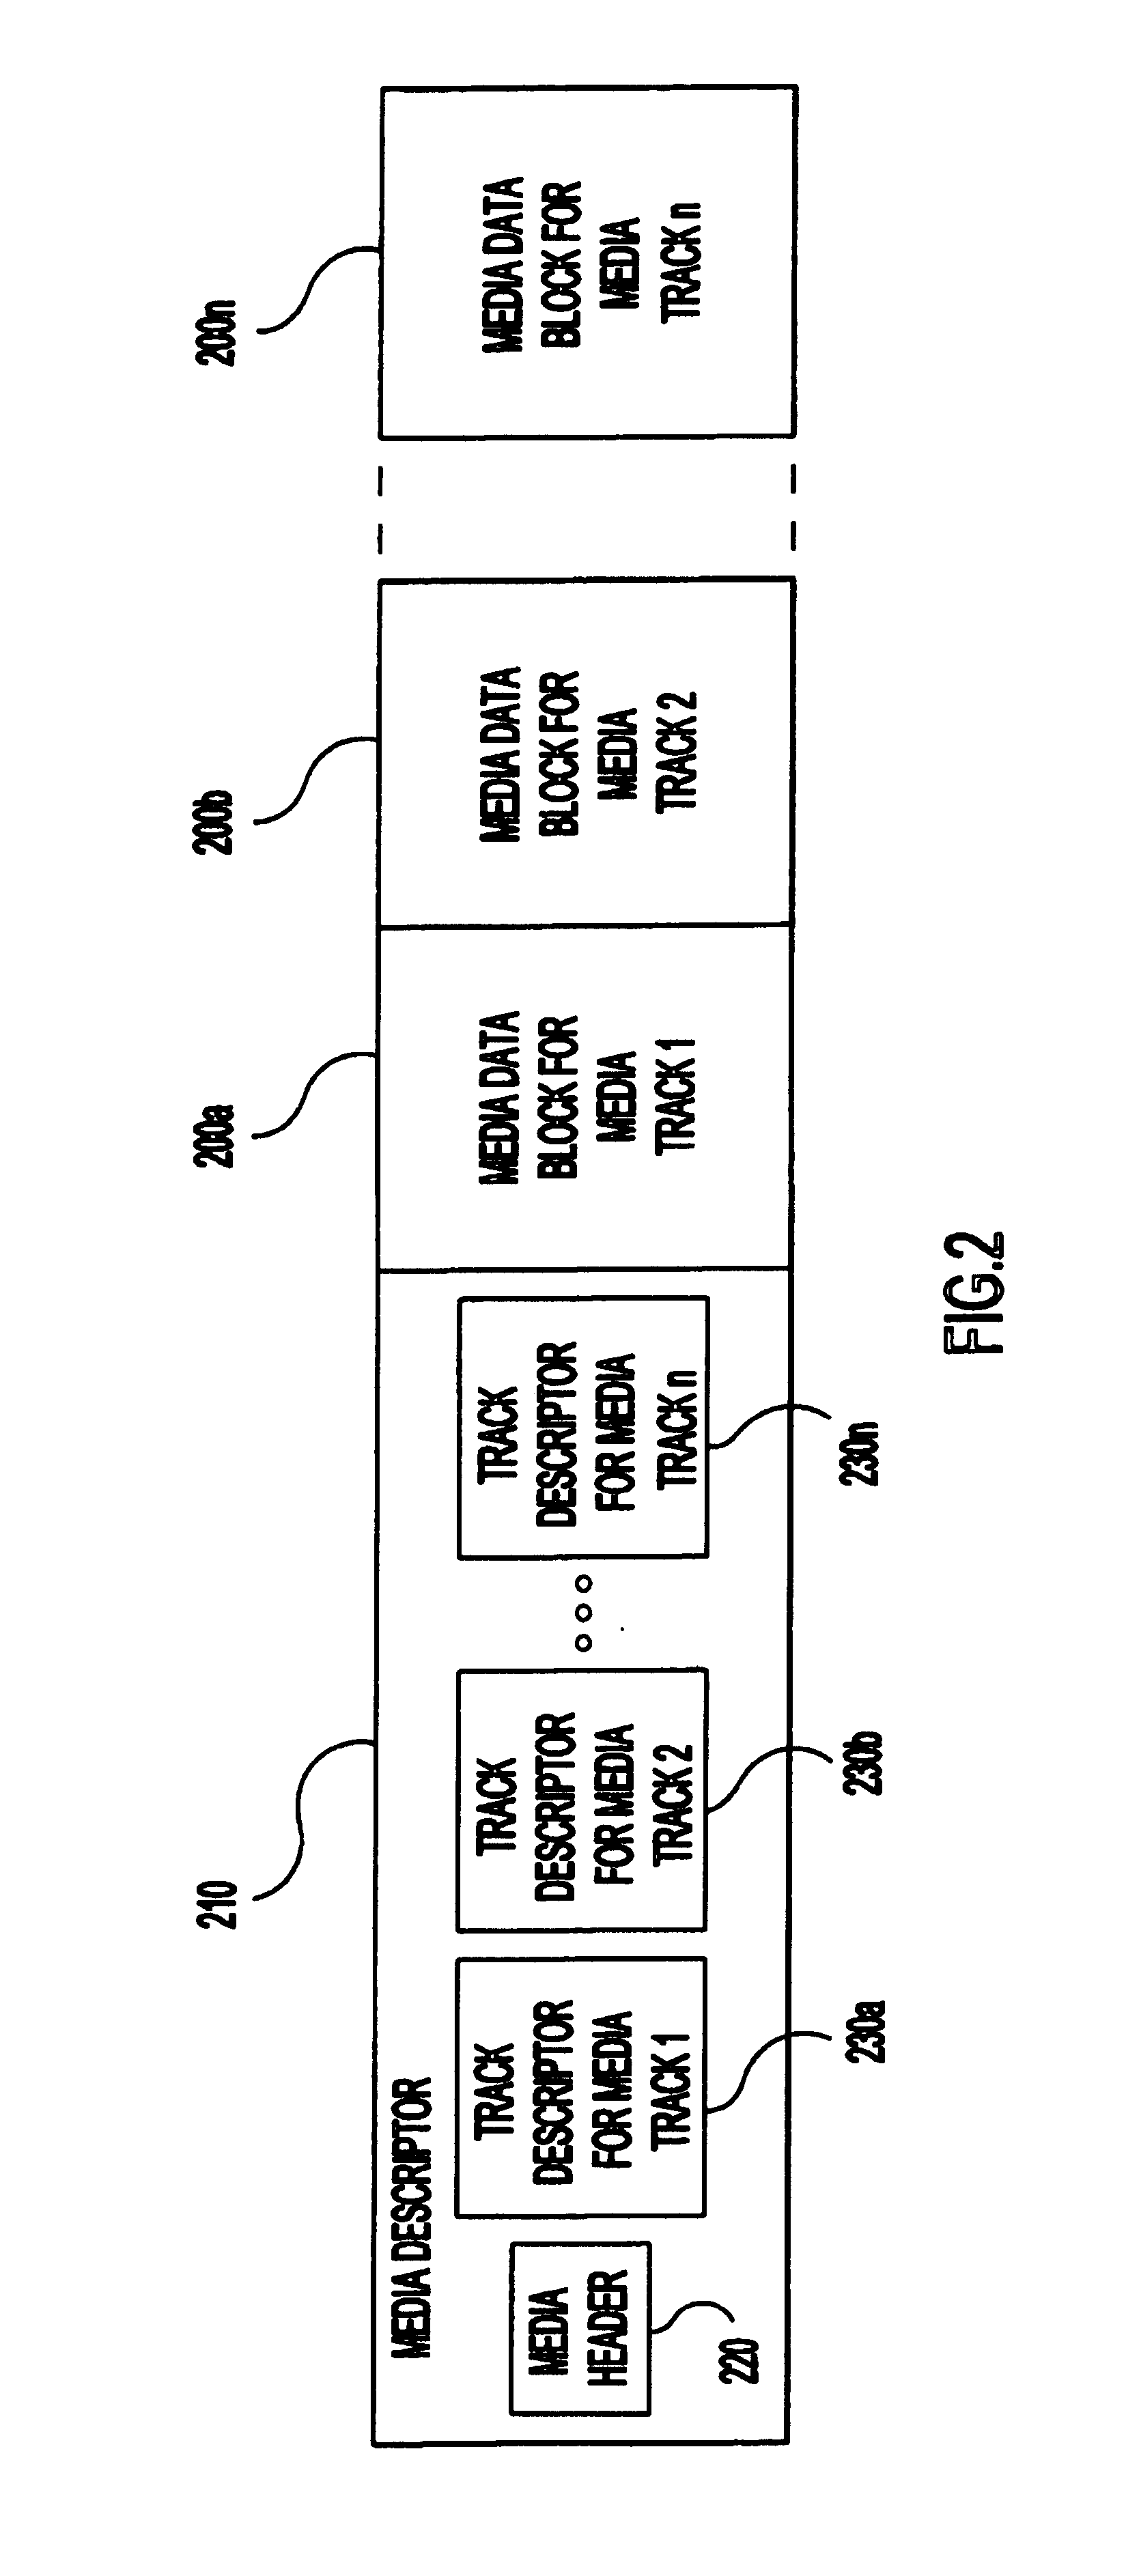 Packet scheduling system and method for multimedia data